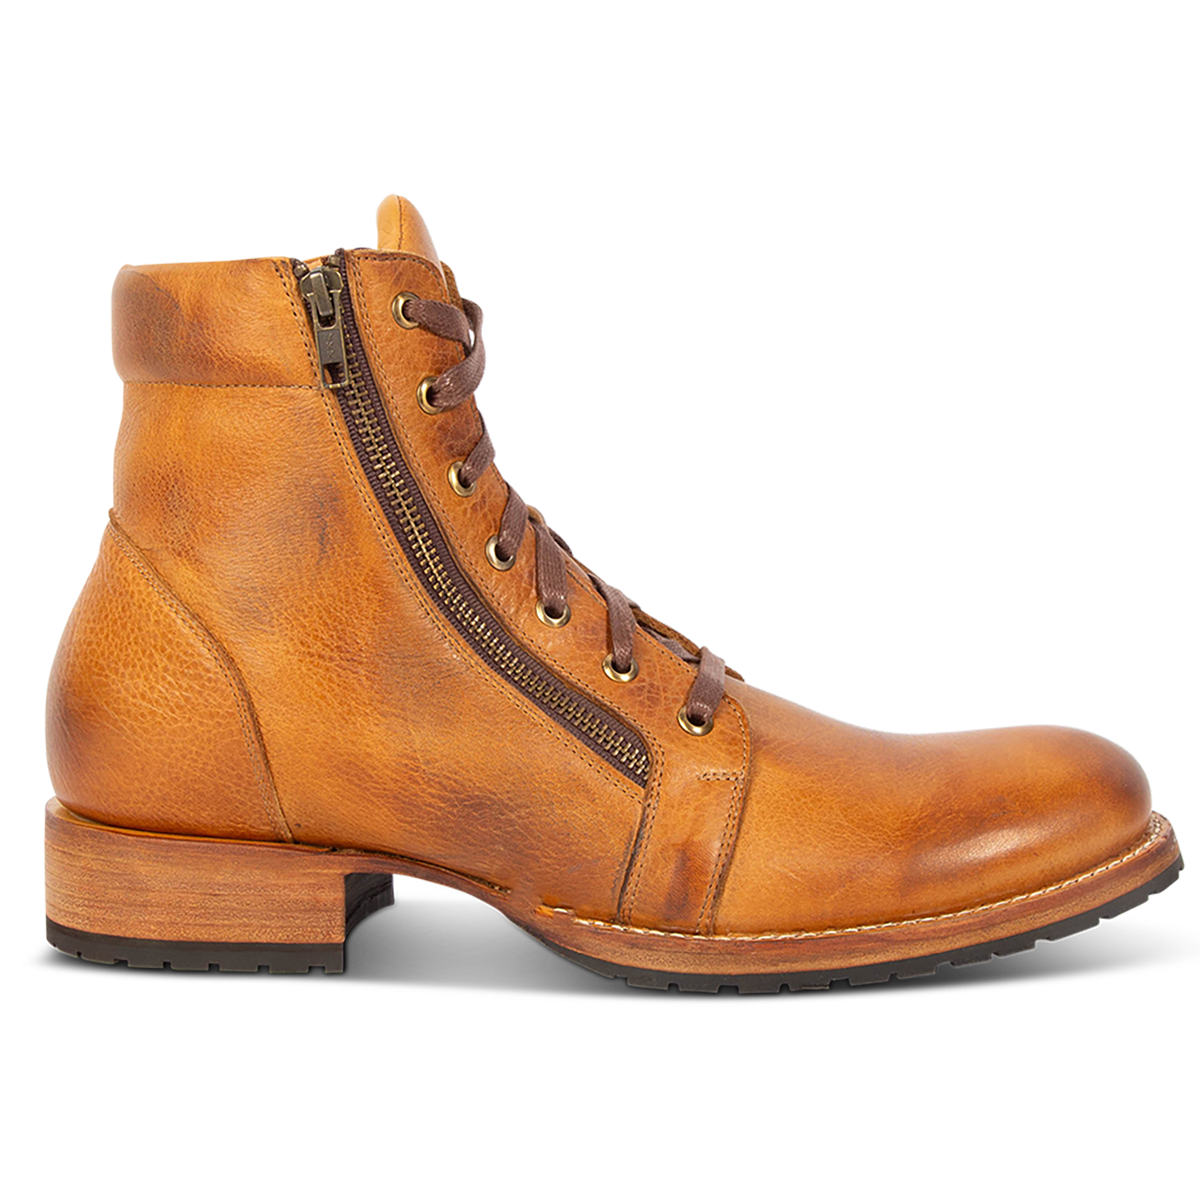 FREEBIRD men's Chevy tan leather boot with Goodyear welt and rubber tread sole, double paired zip closures and adjustable front lacing